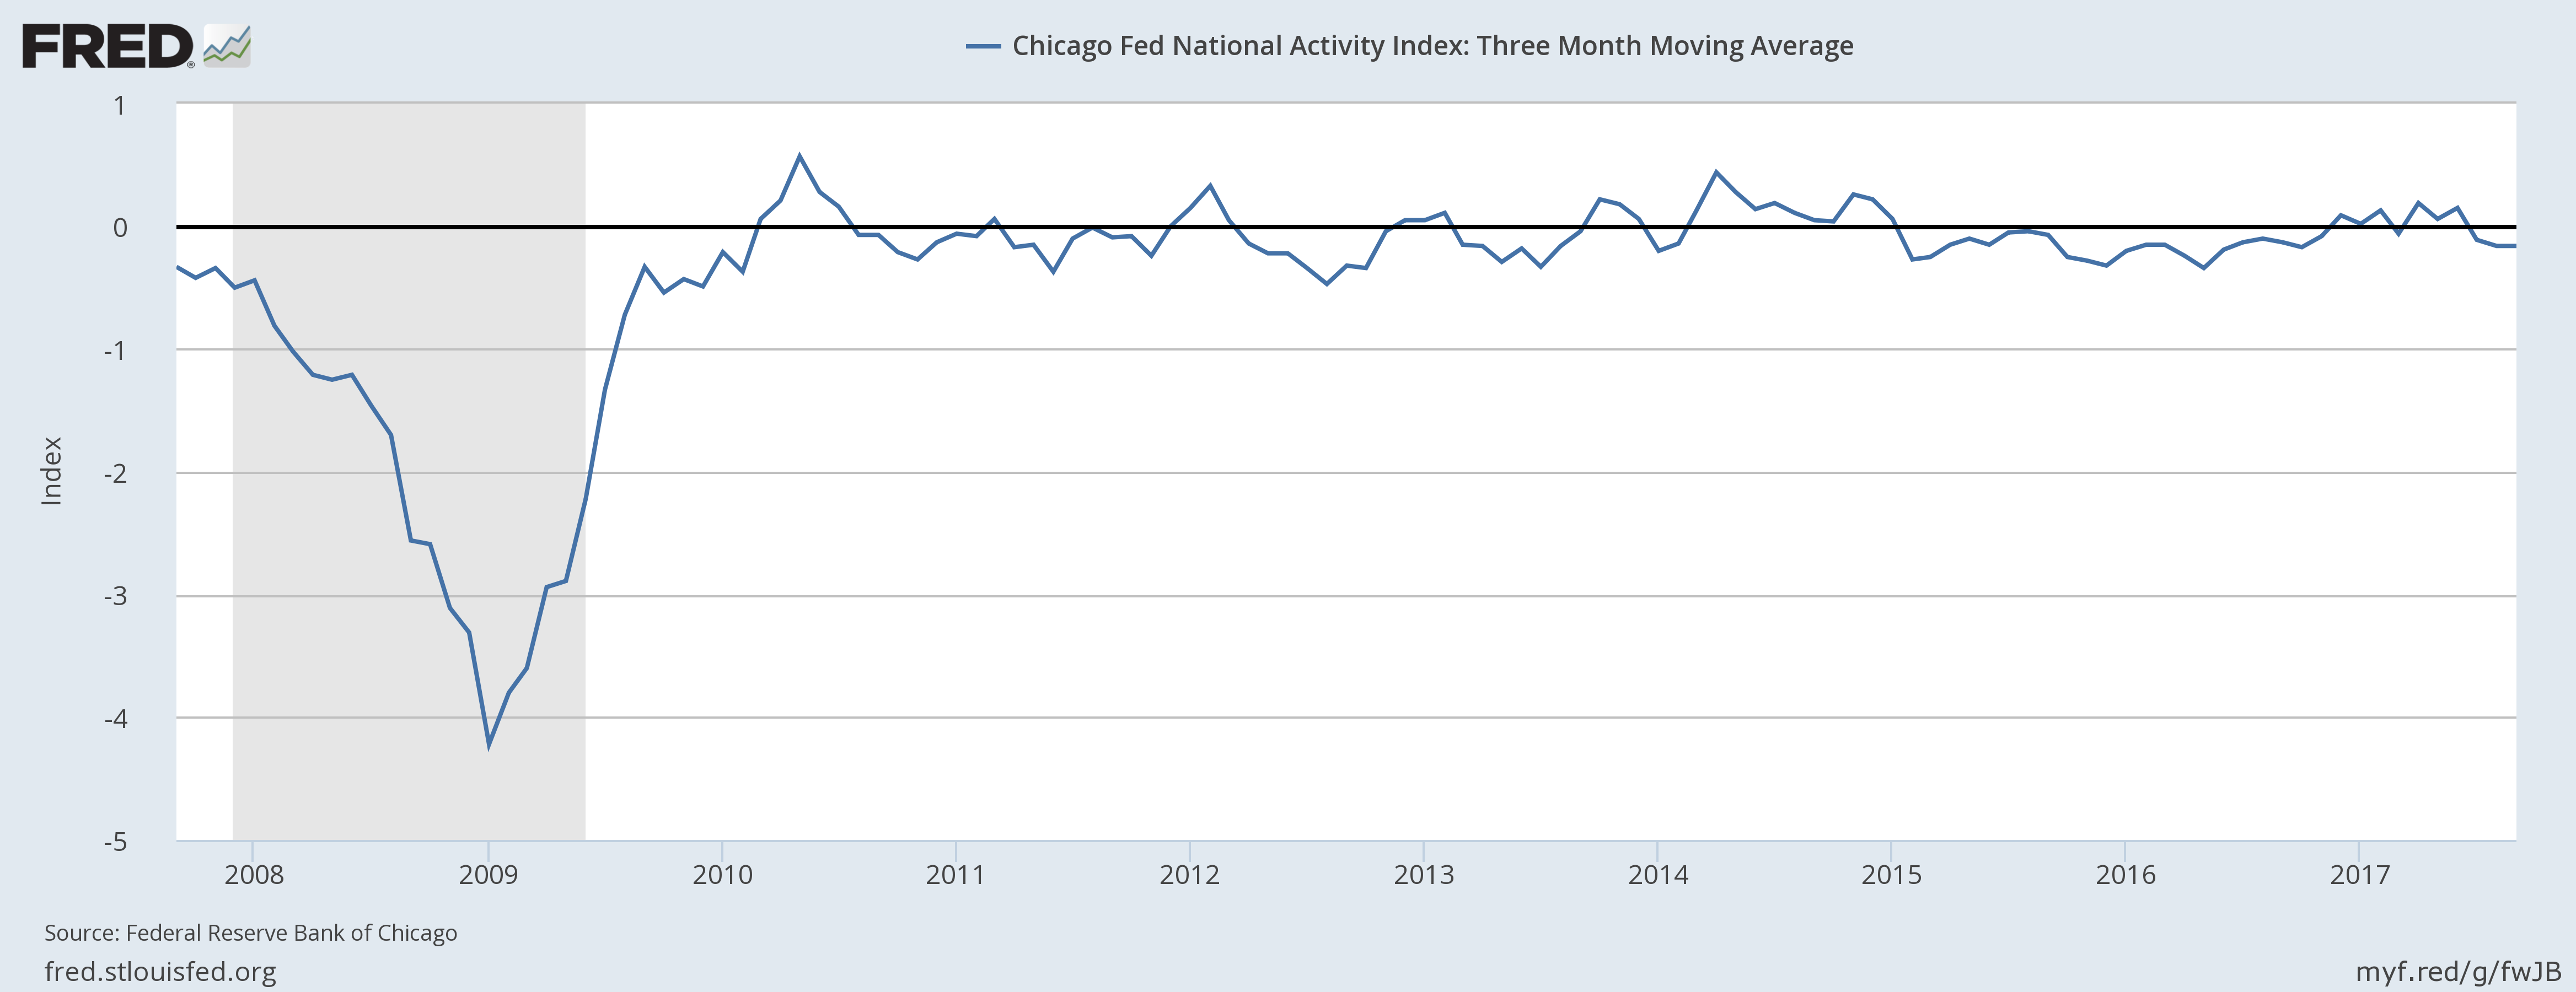 Chicago Fed National Activity Index Three Month Moving Average